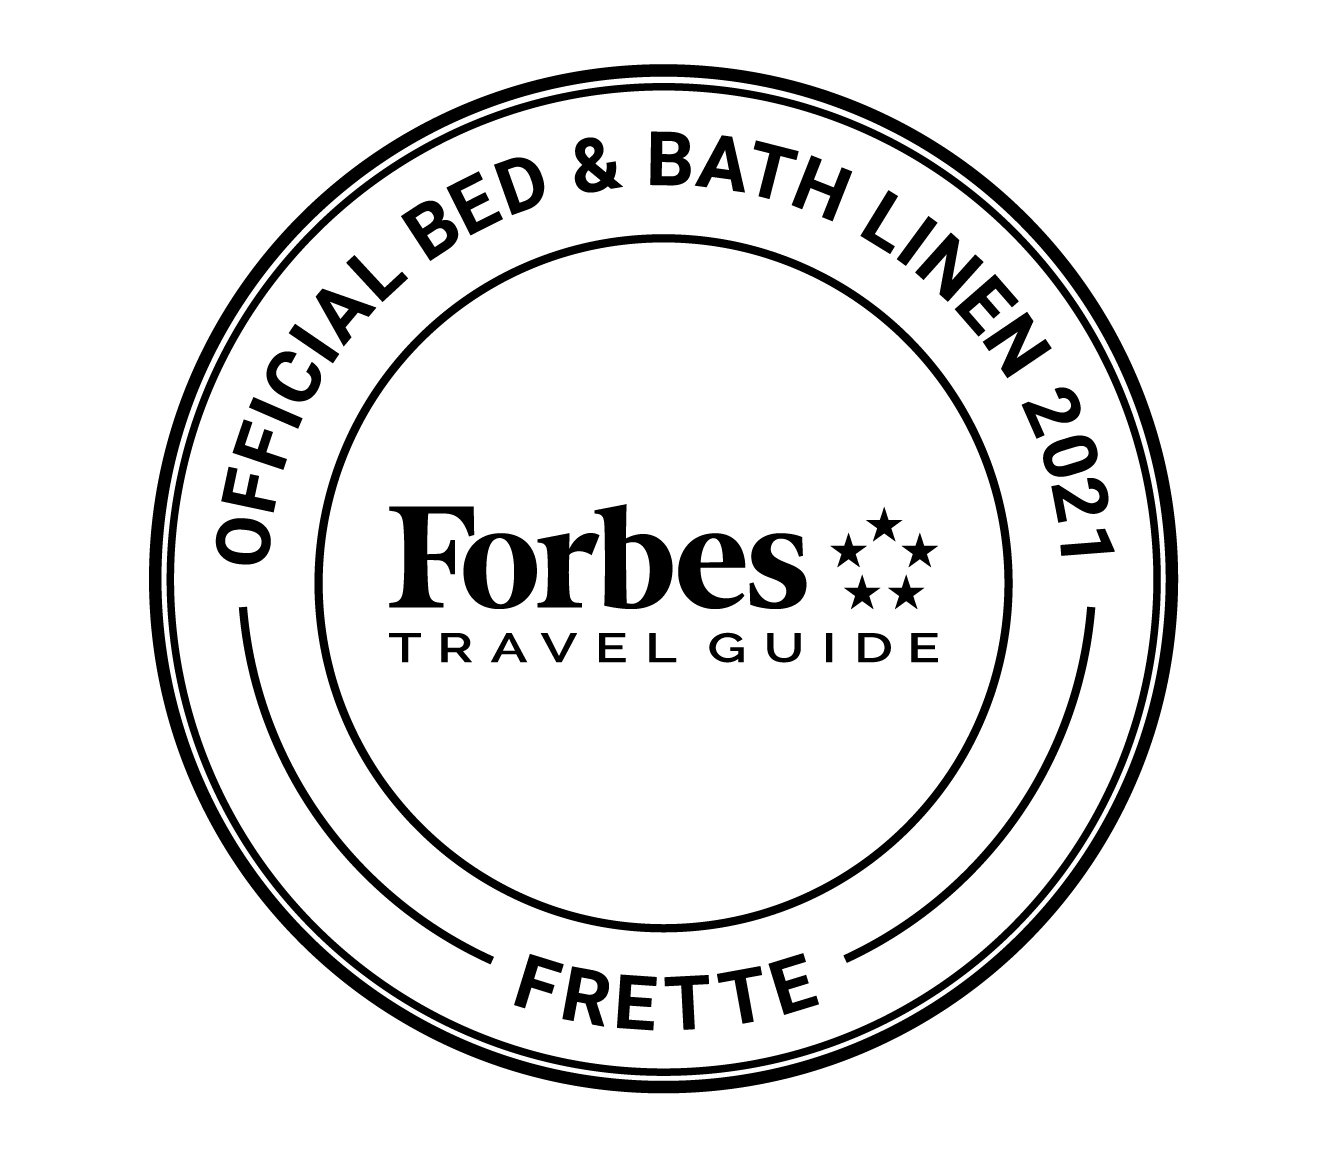 Official Bed and bath Linen 2021 Forbes Travel Guide Frette